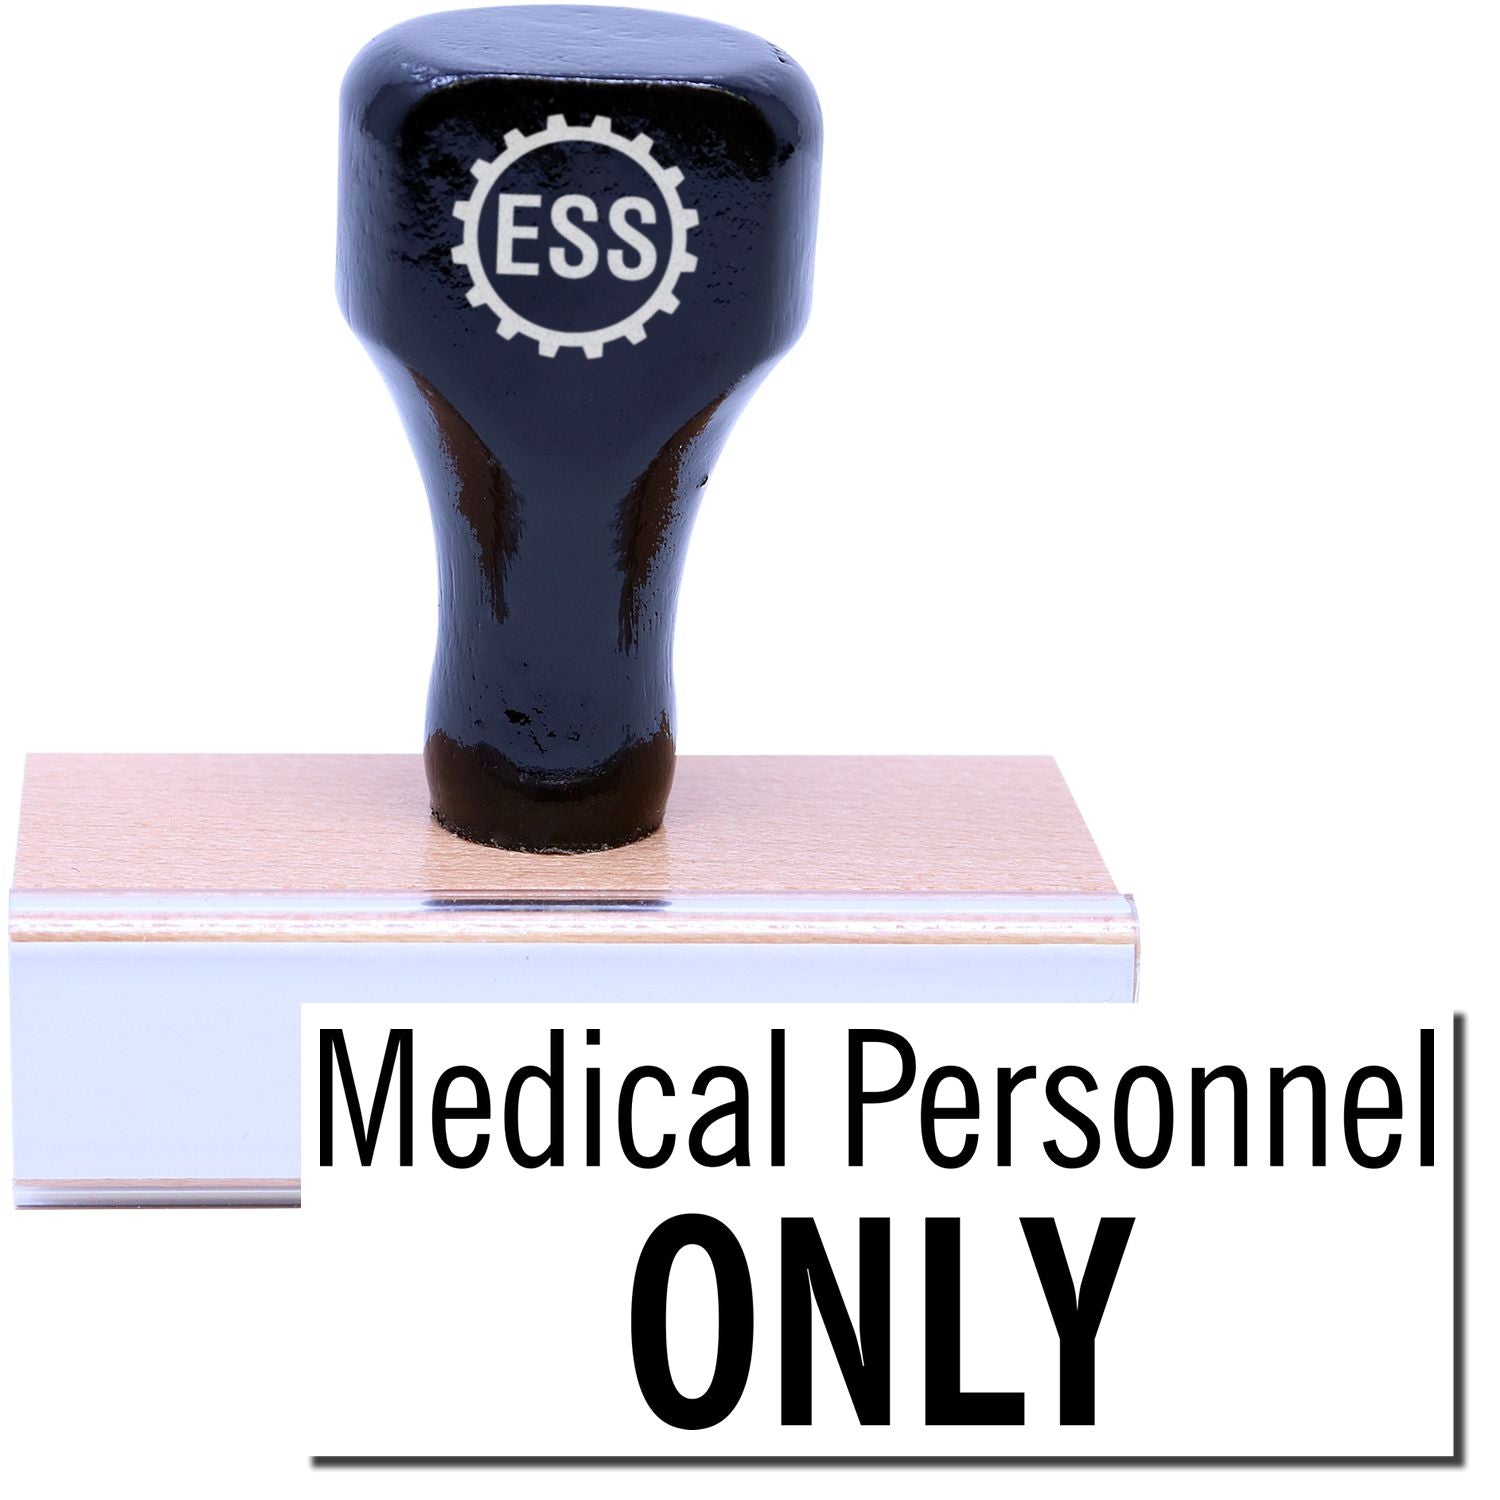 A stock office medical rubber stamp with a stamped image showing how the text "Medical Personnel ONLY" is displayed after stamping.